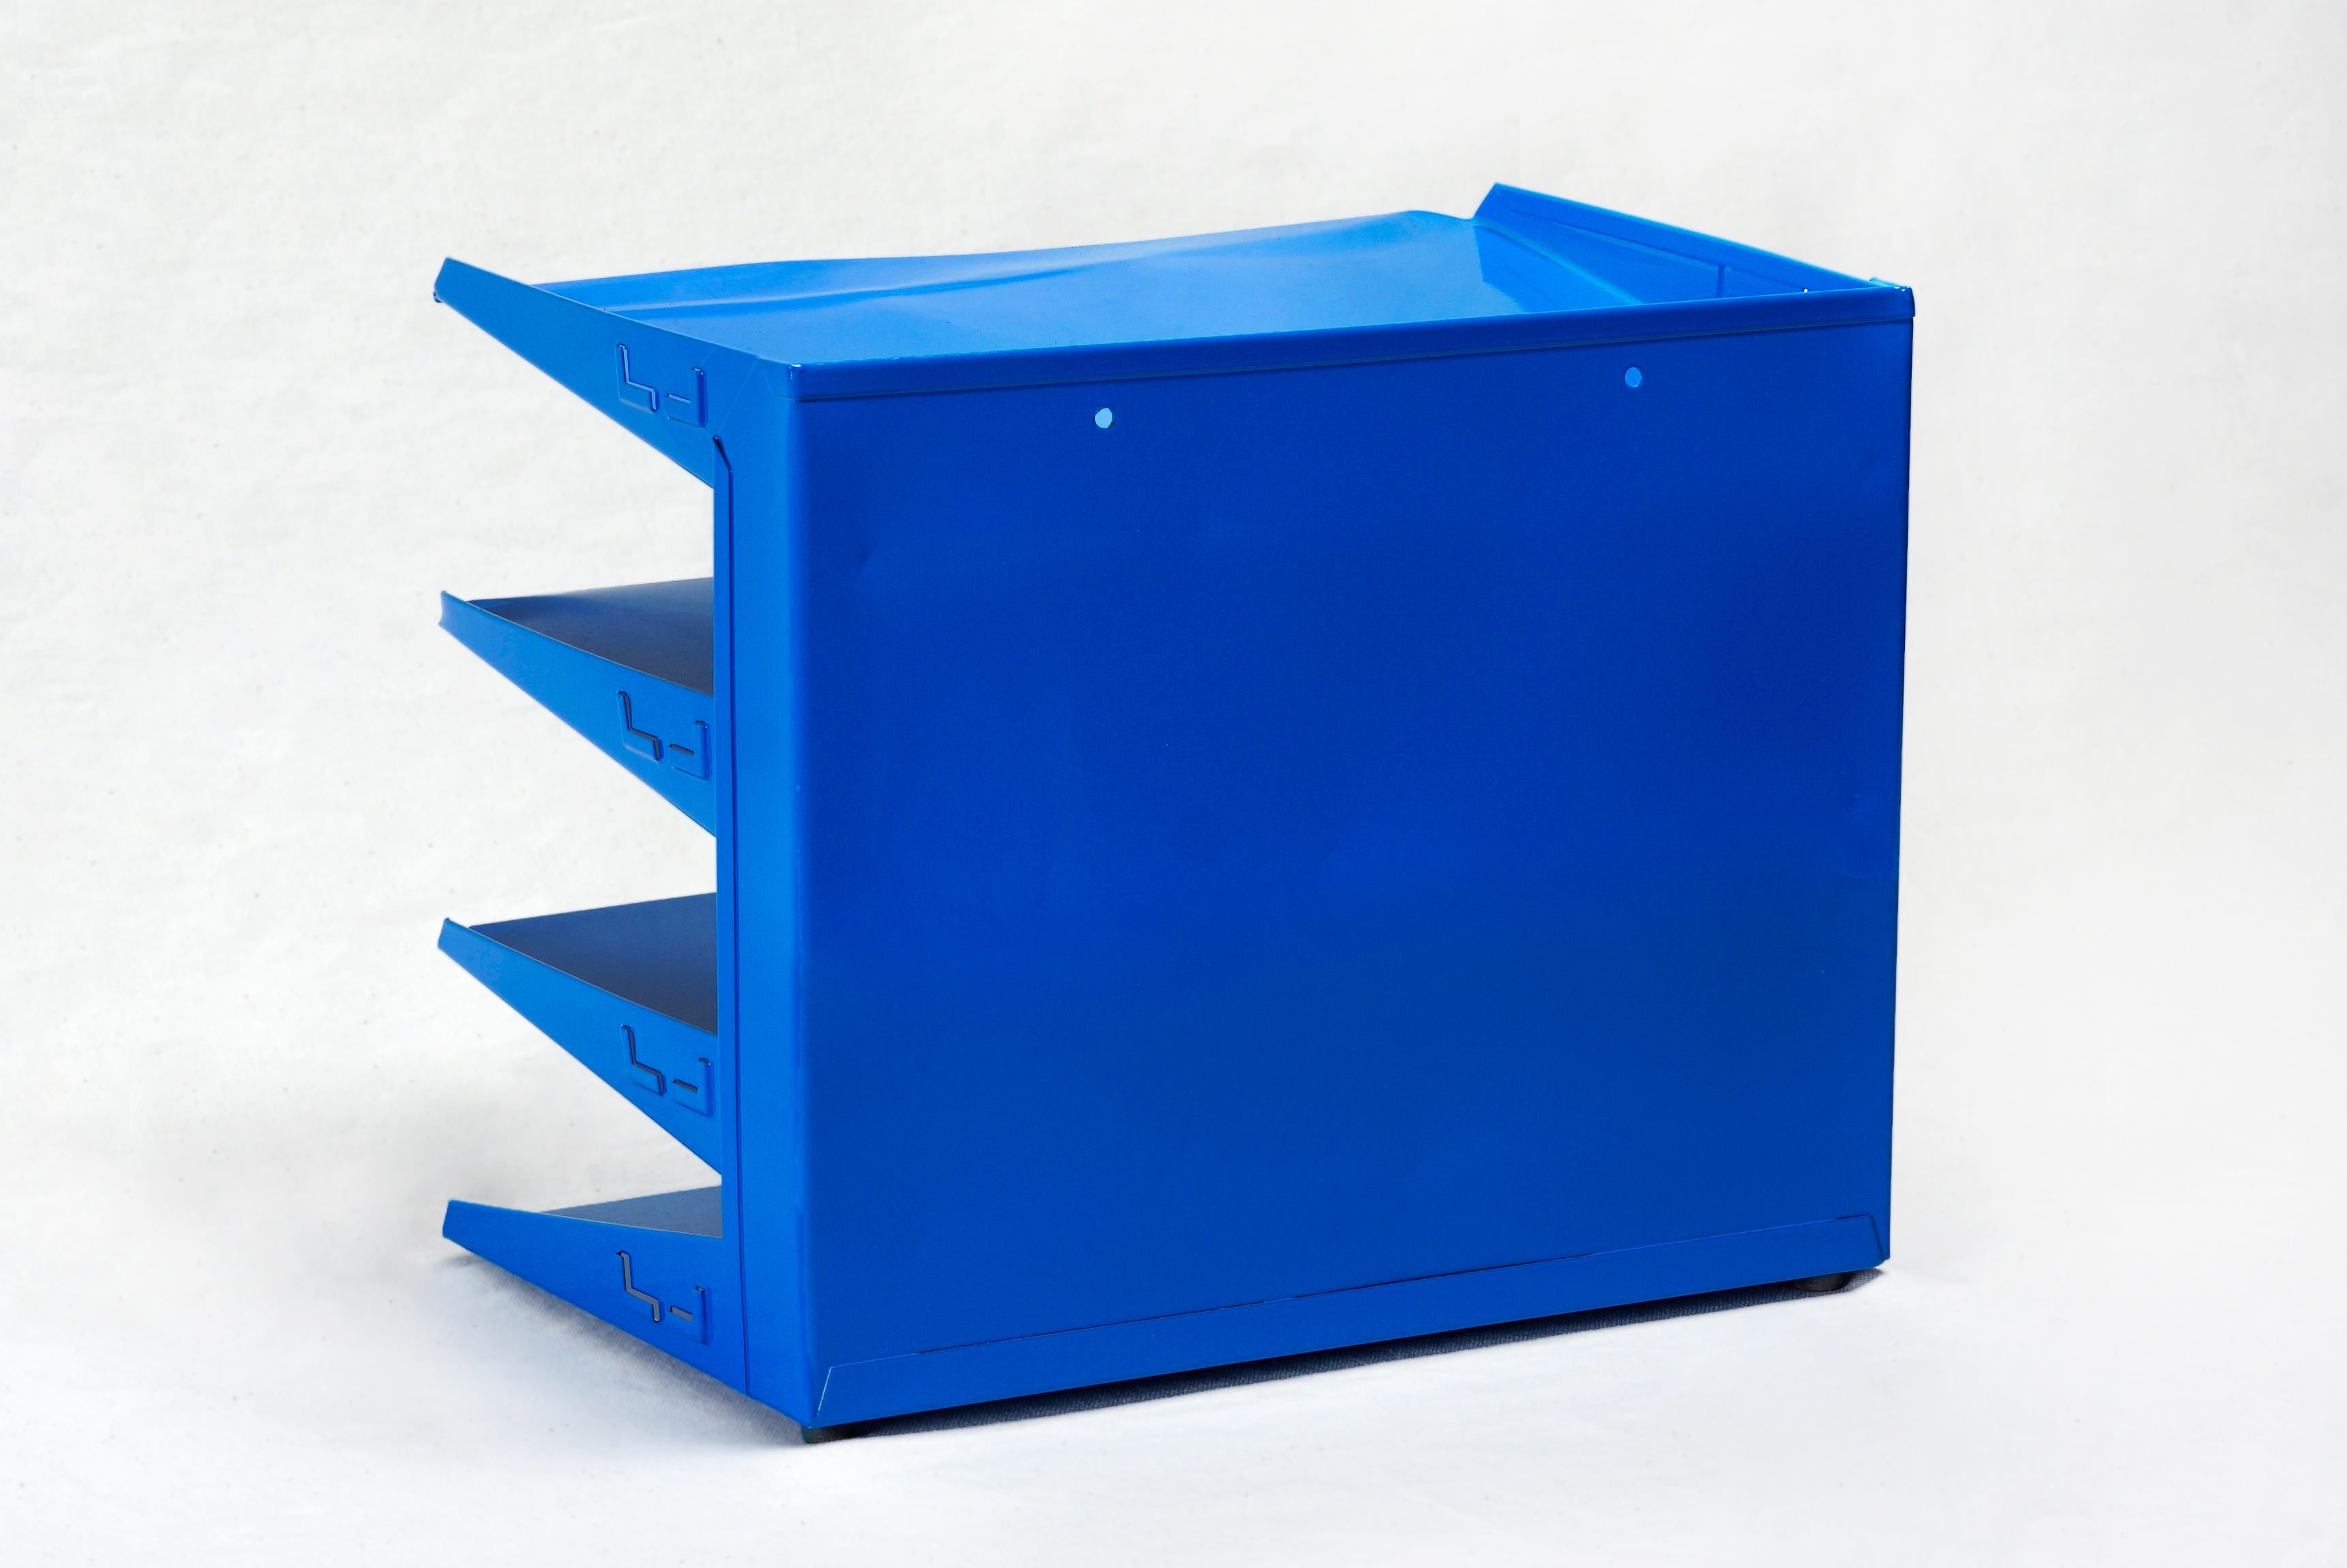 Powder-Coated Retro Office Mail Organizer, Refinished in Blue